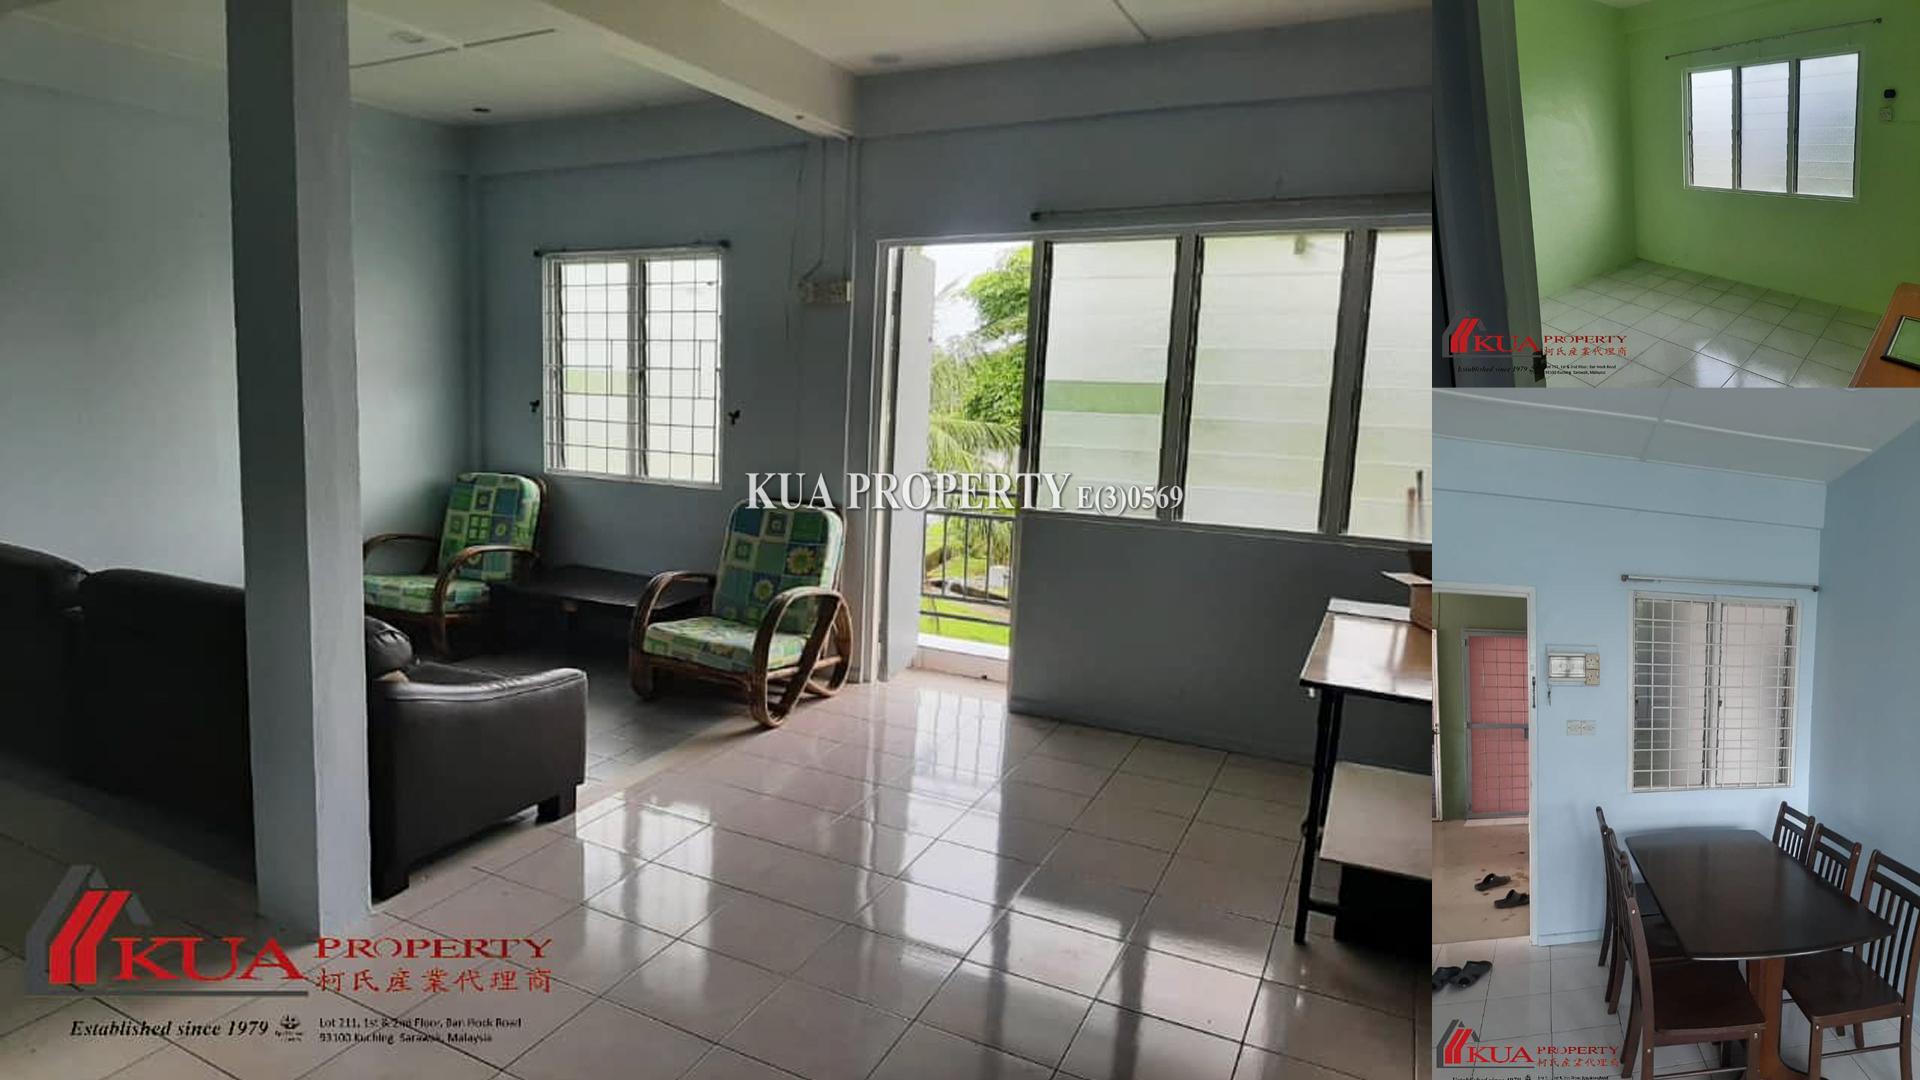 3rd Floor Apartment For Rent! Located at Arang Road, Kuching